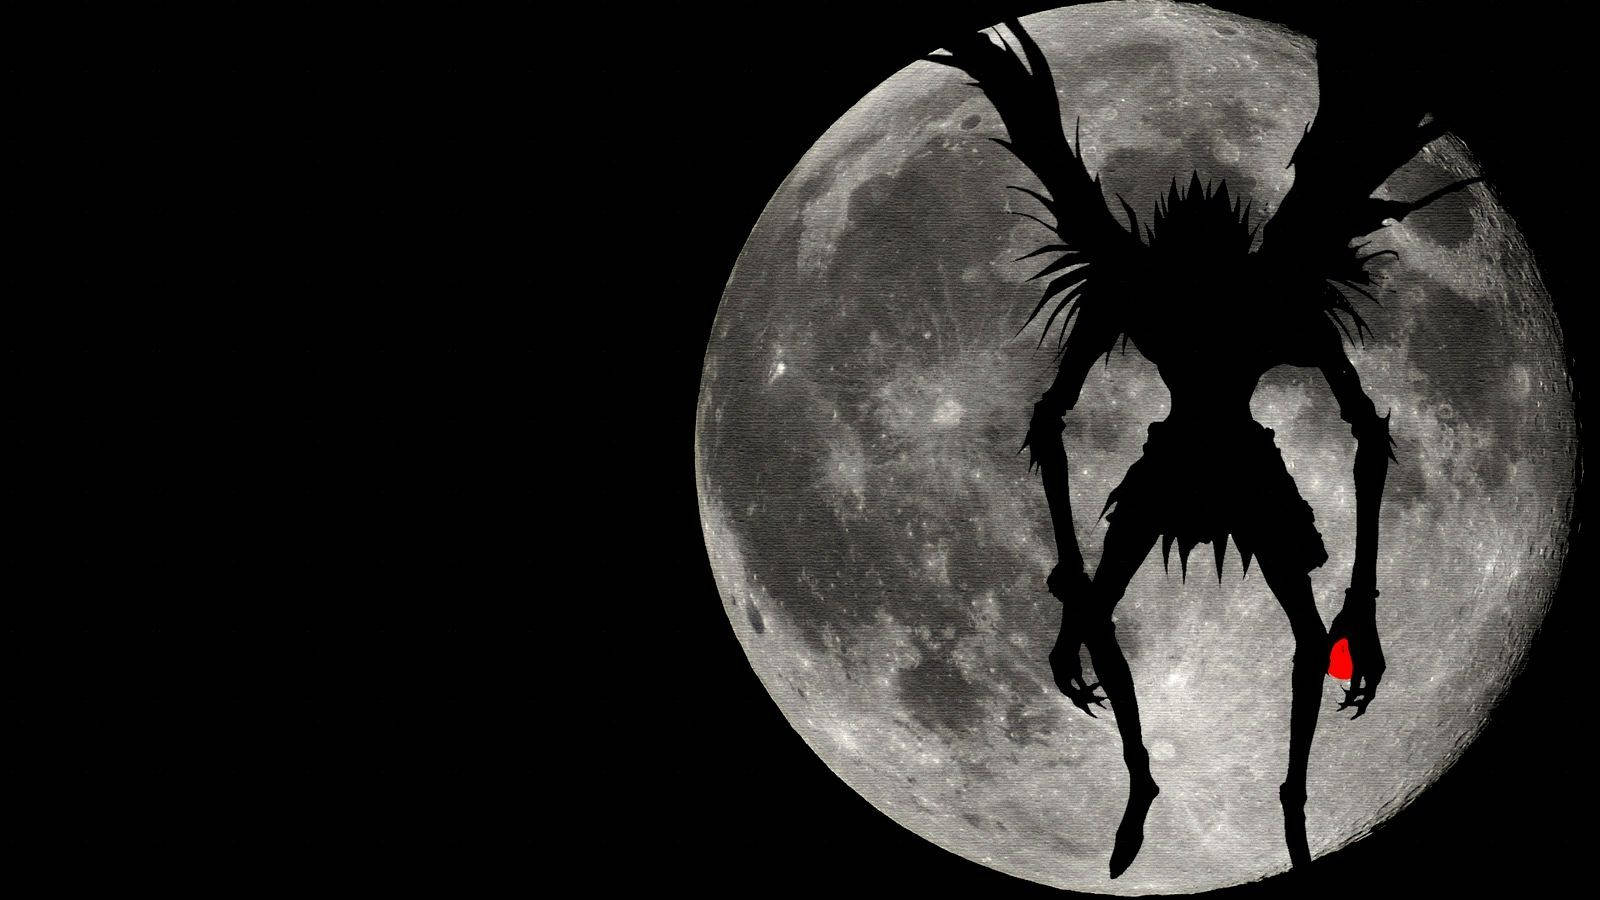 Shinigami Ryuk From The Anime Series, Death Note